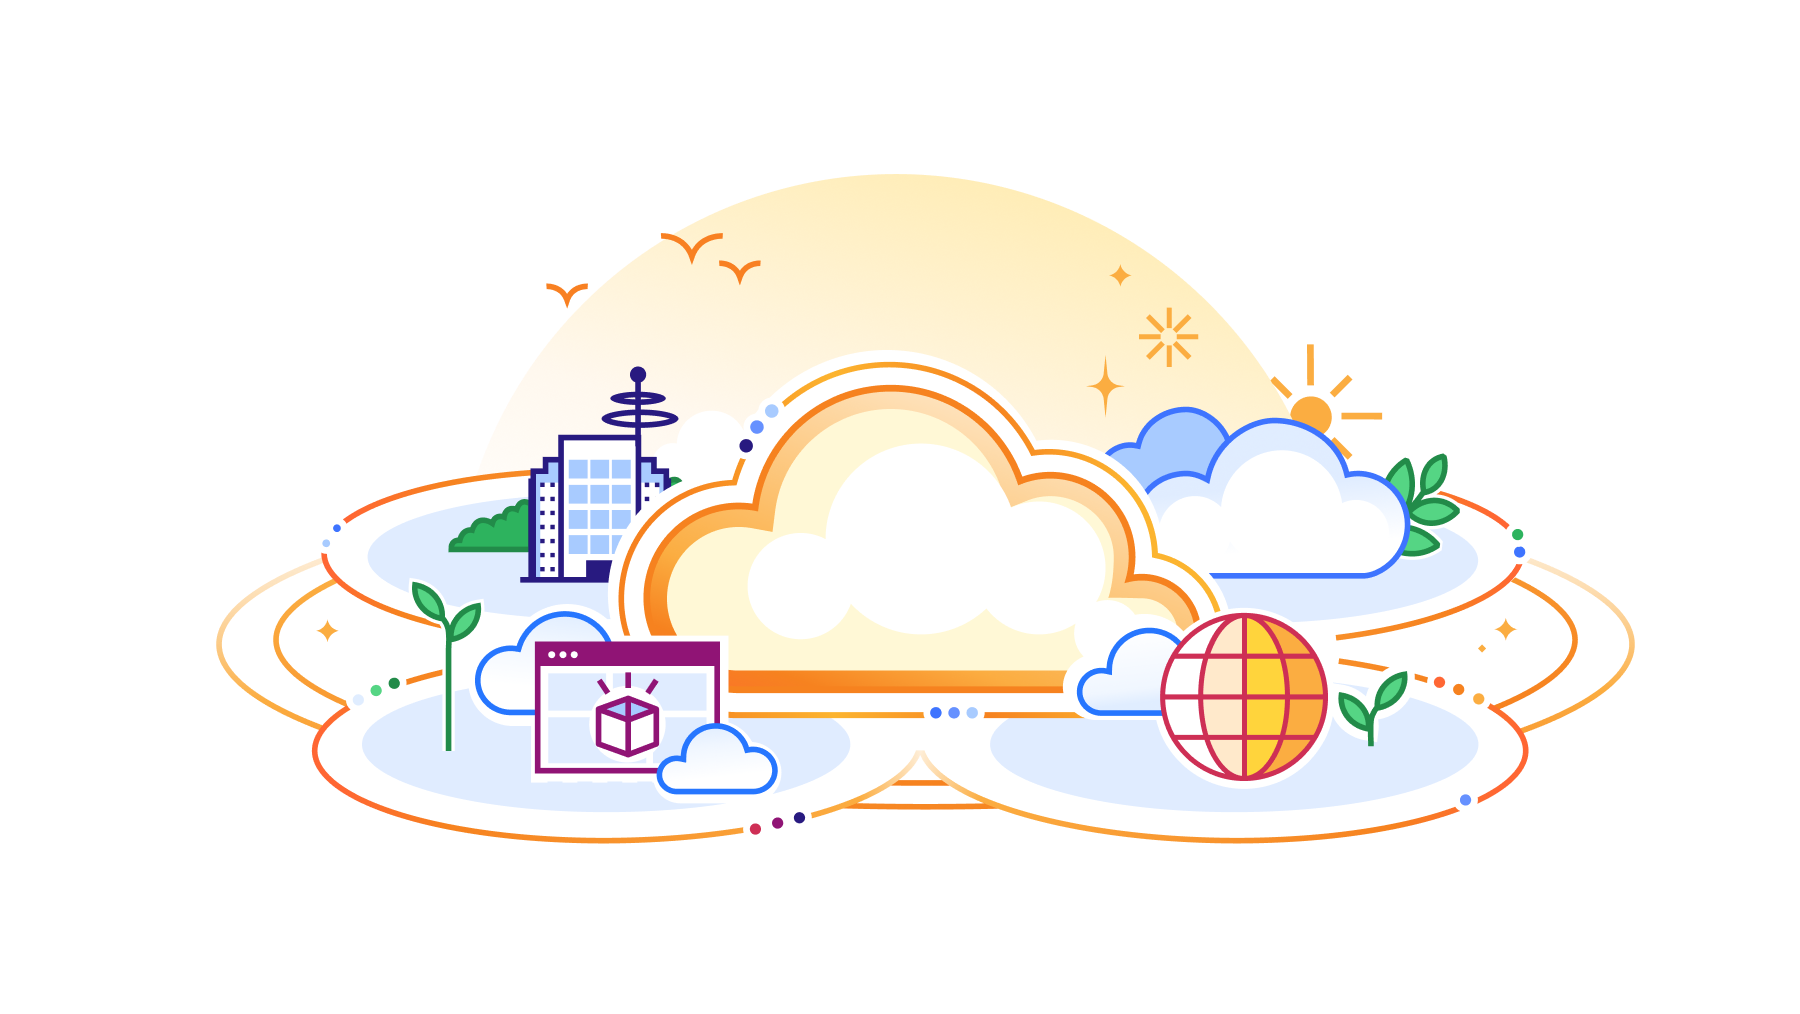 Welcome to connectivity cloud: the modern way to connect and protect your clouds, networks, applications and users